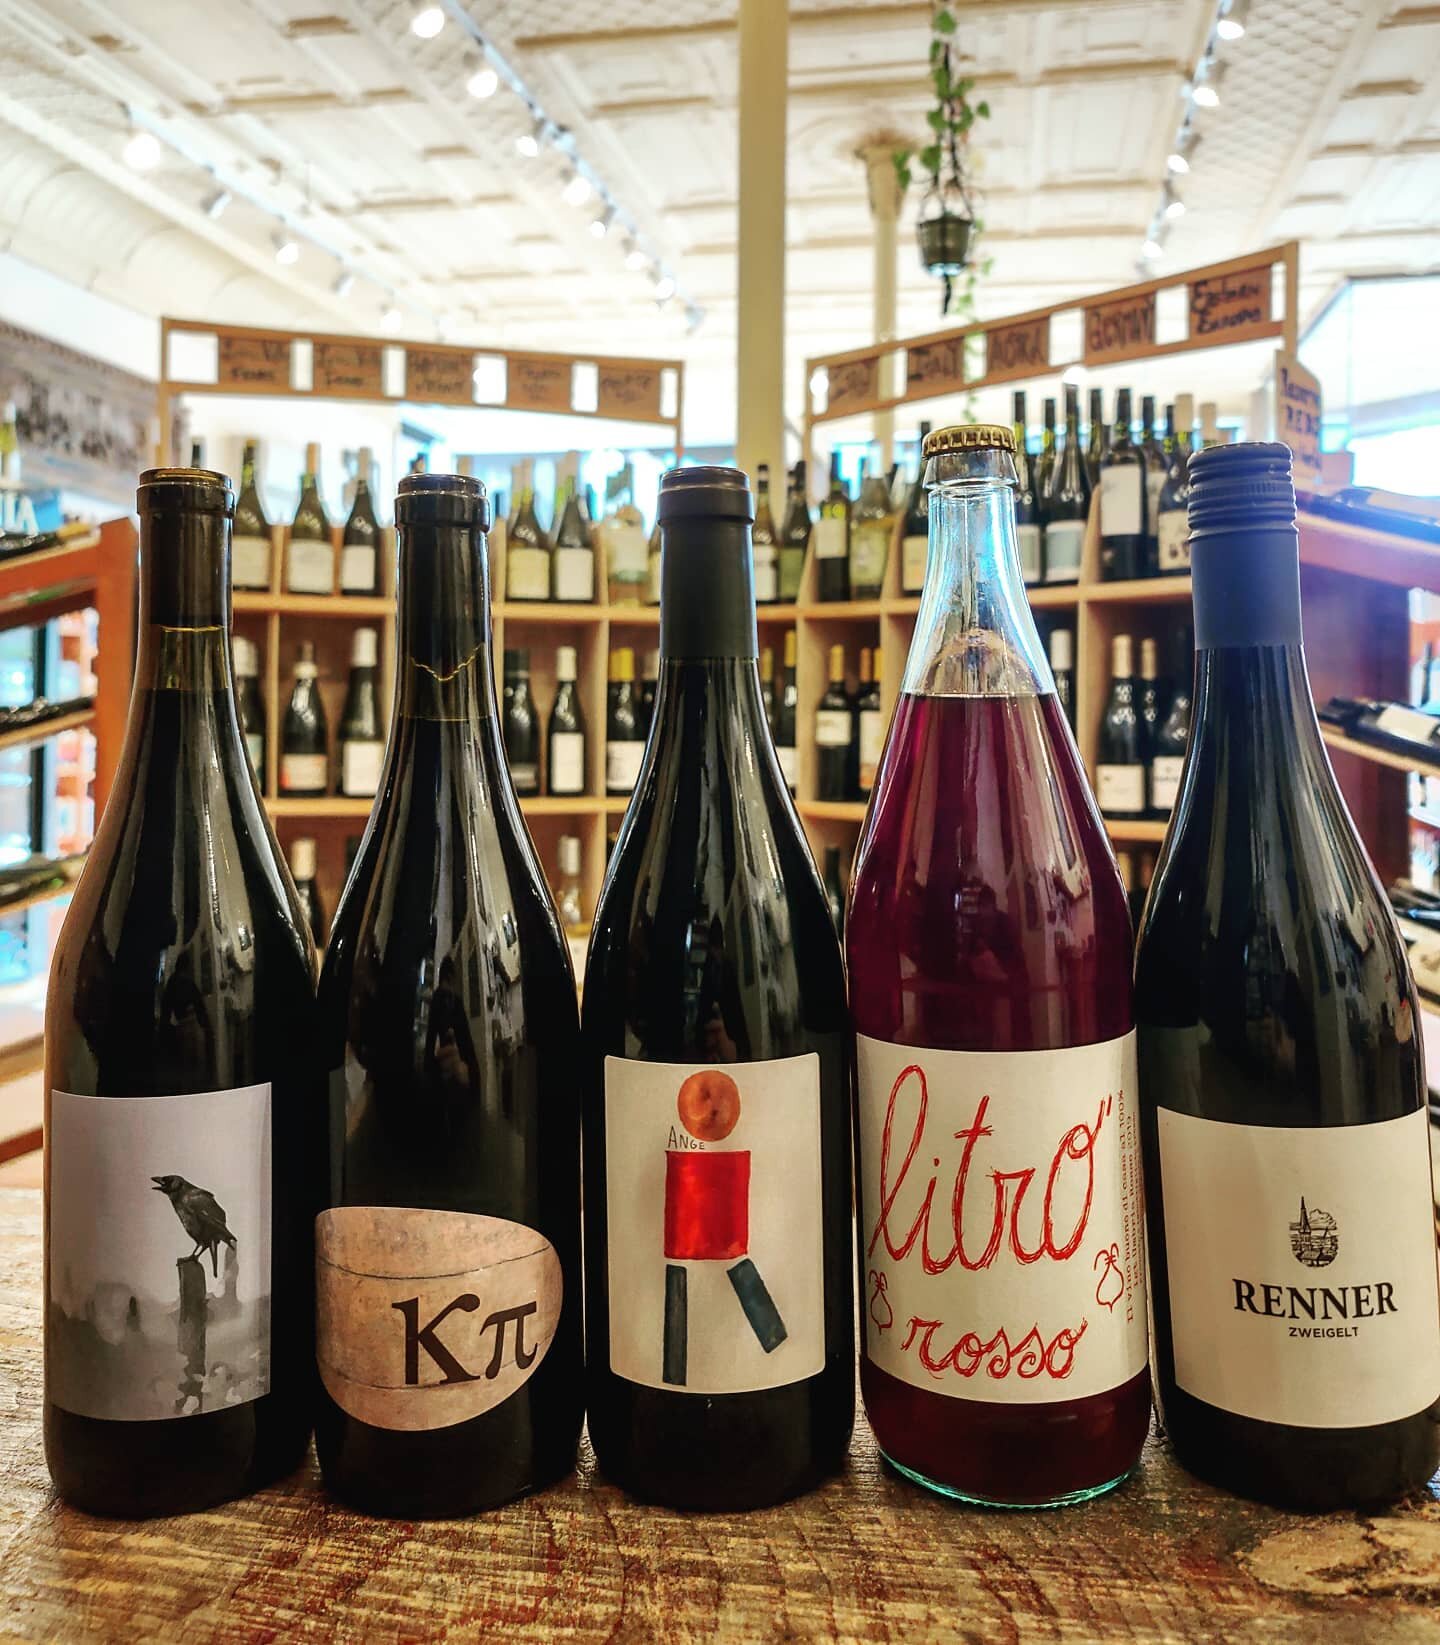 New Wine Alert 🌈 We're bringing in some fresh faces for 2021. From Cali to Austria, we've got new expressive, lovely, o'natural reds gracing the shelves waiting to get guzzled with some winter fare.
.
.
.
.
.
.
.
.
.
.
.
.
.
.
.
#naturalwine #vinnat